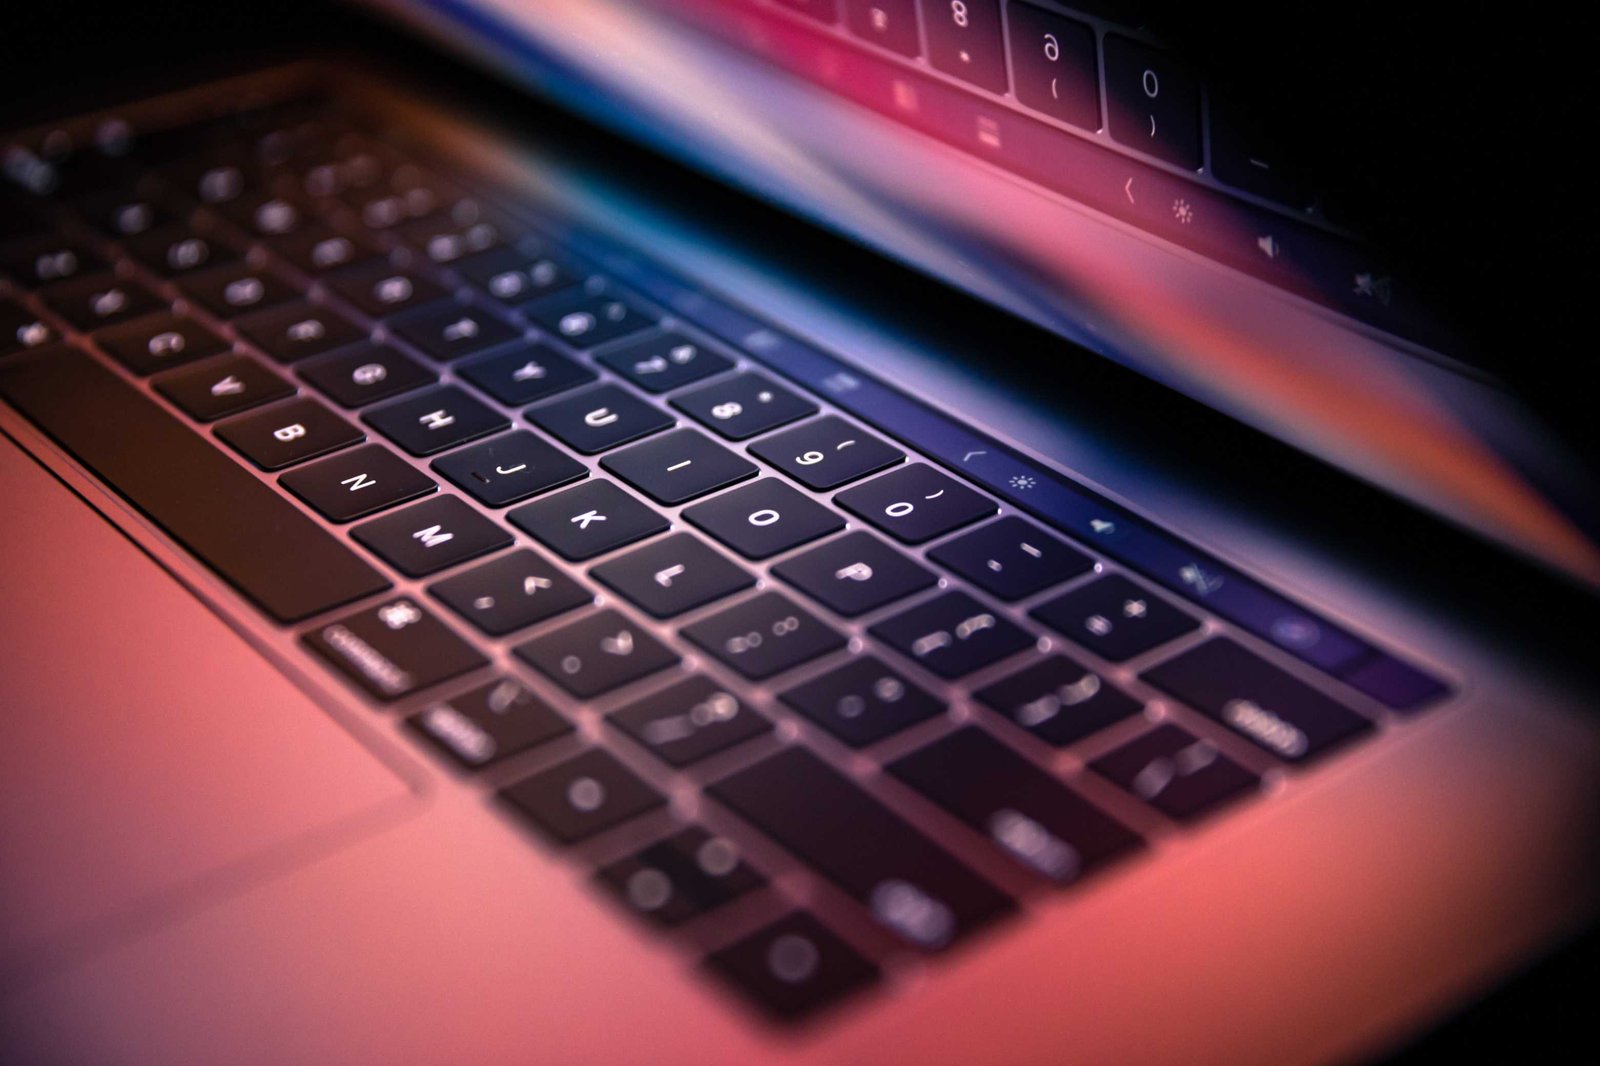 Top 5 Reasons to Rent a MacBook Pro Instead of Buying